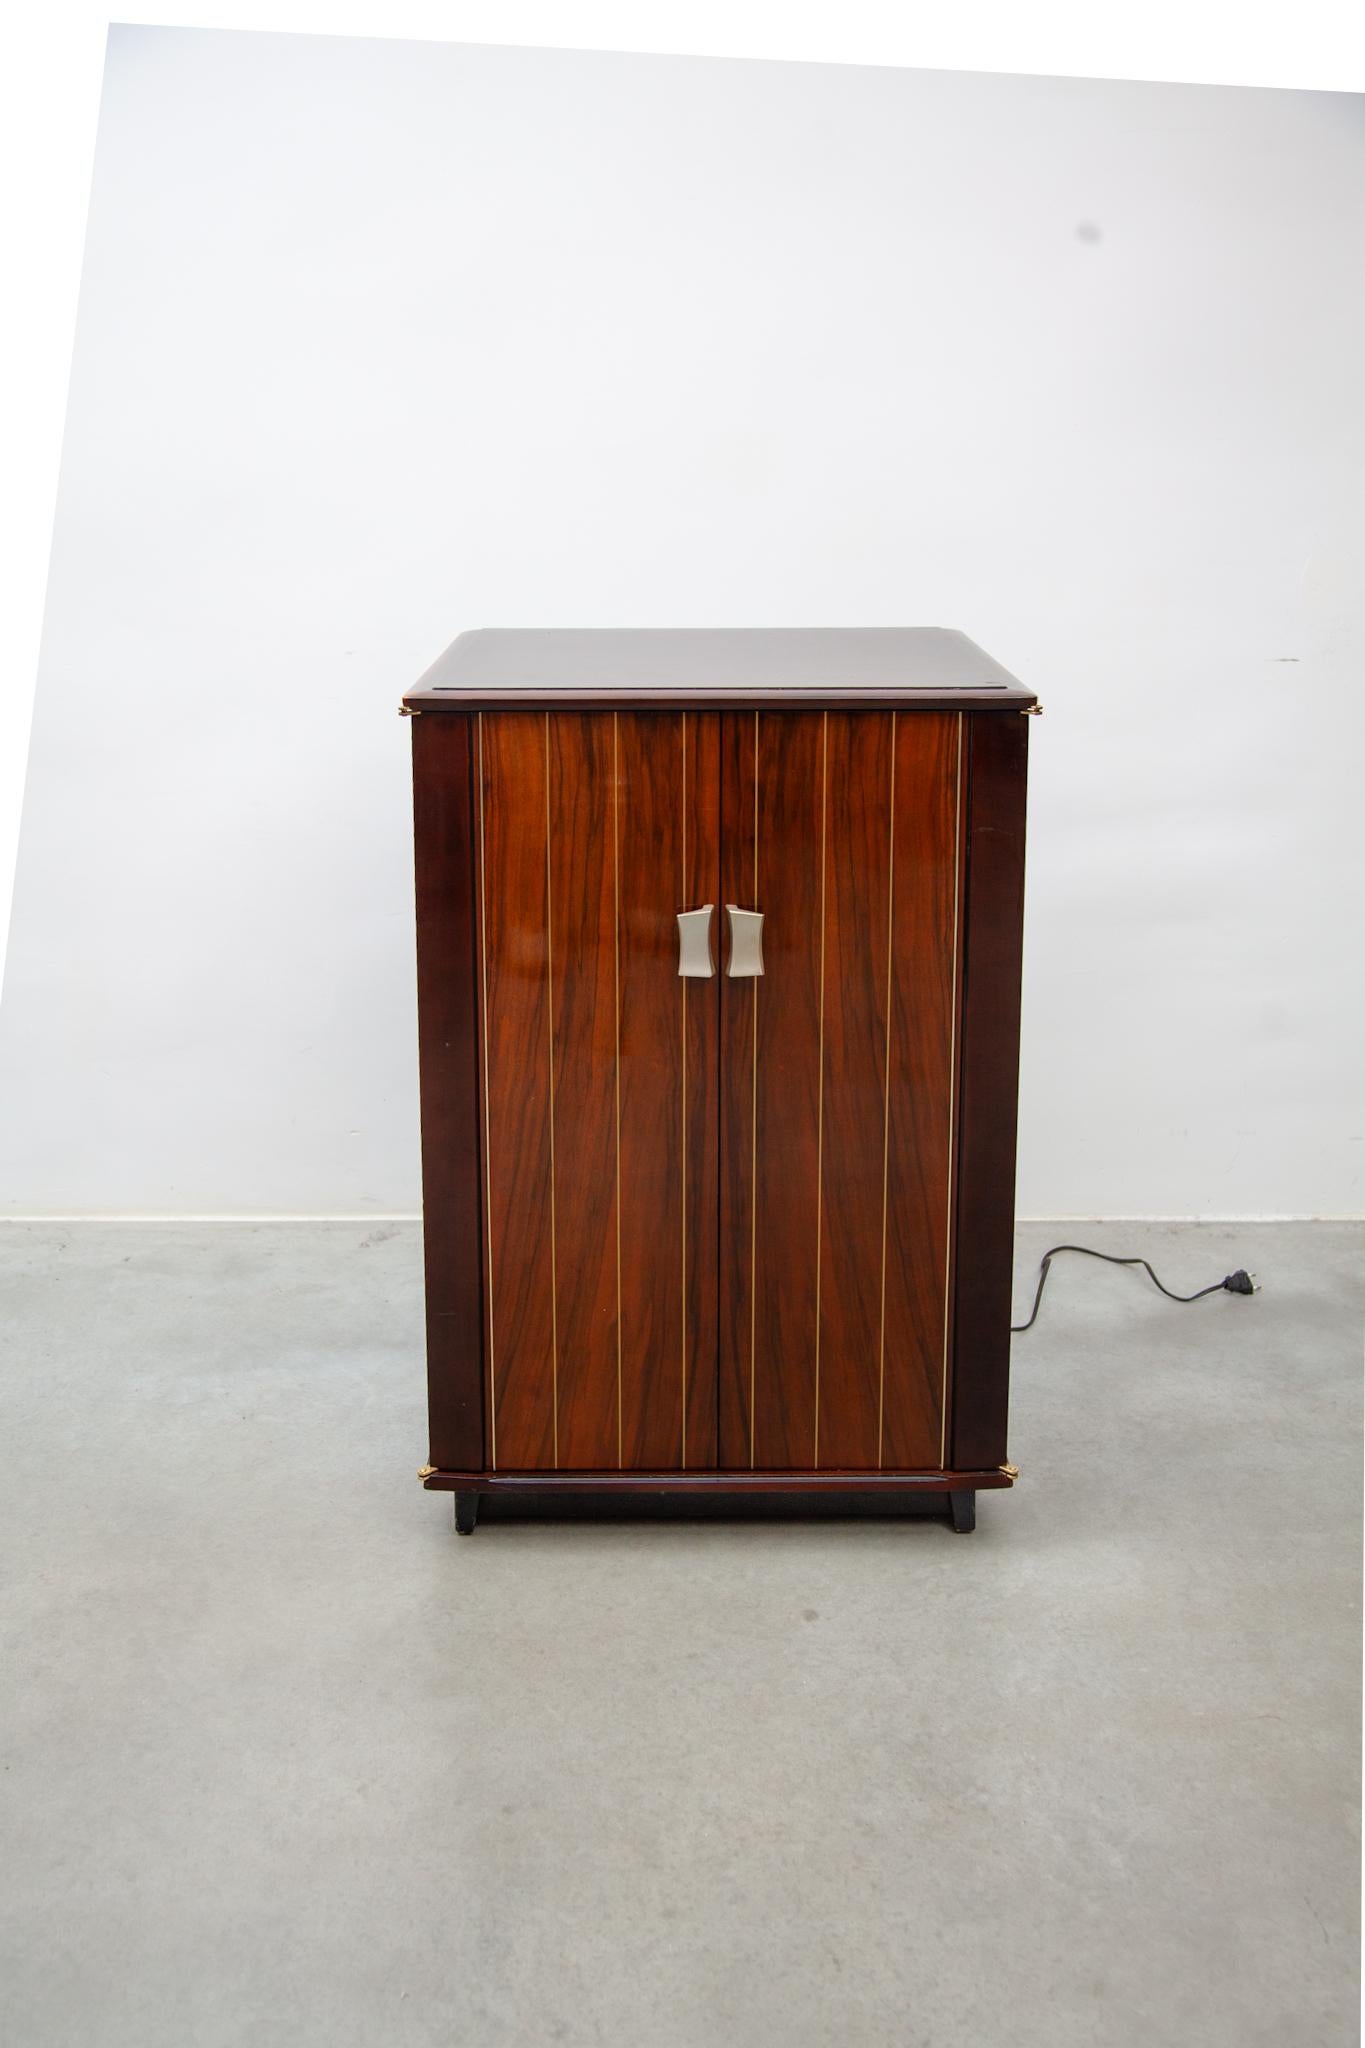 Beautiful collectors De Coene 50s sideboard with renewed built-in stereo Bluetooth installation and original 50s Philips speakers in perfect working condition, it fills your interior with the sound you love. A beautiful piece of furniture made of